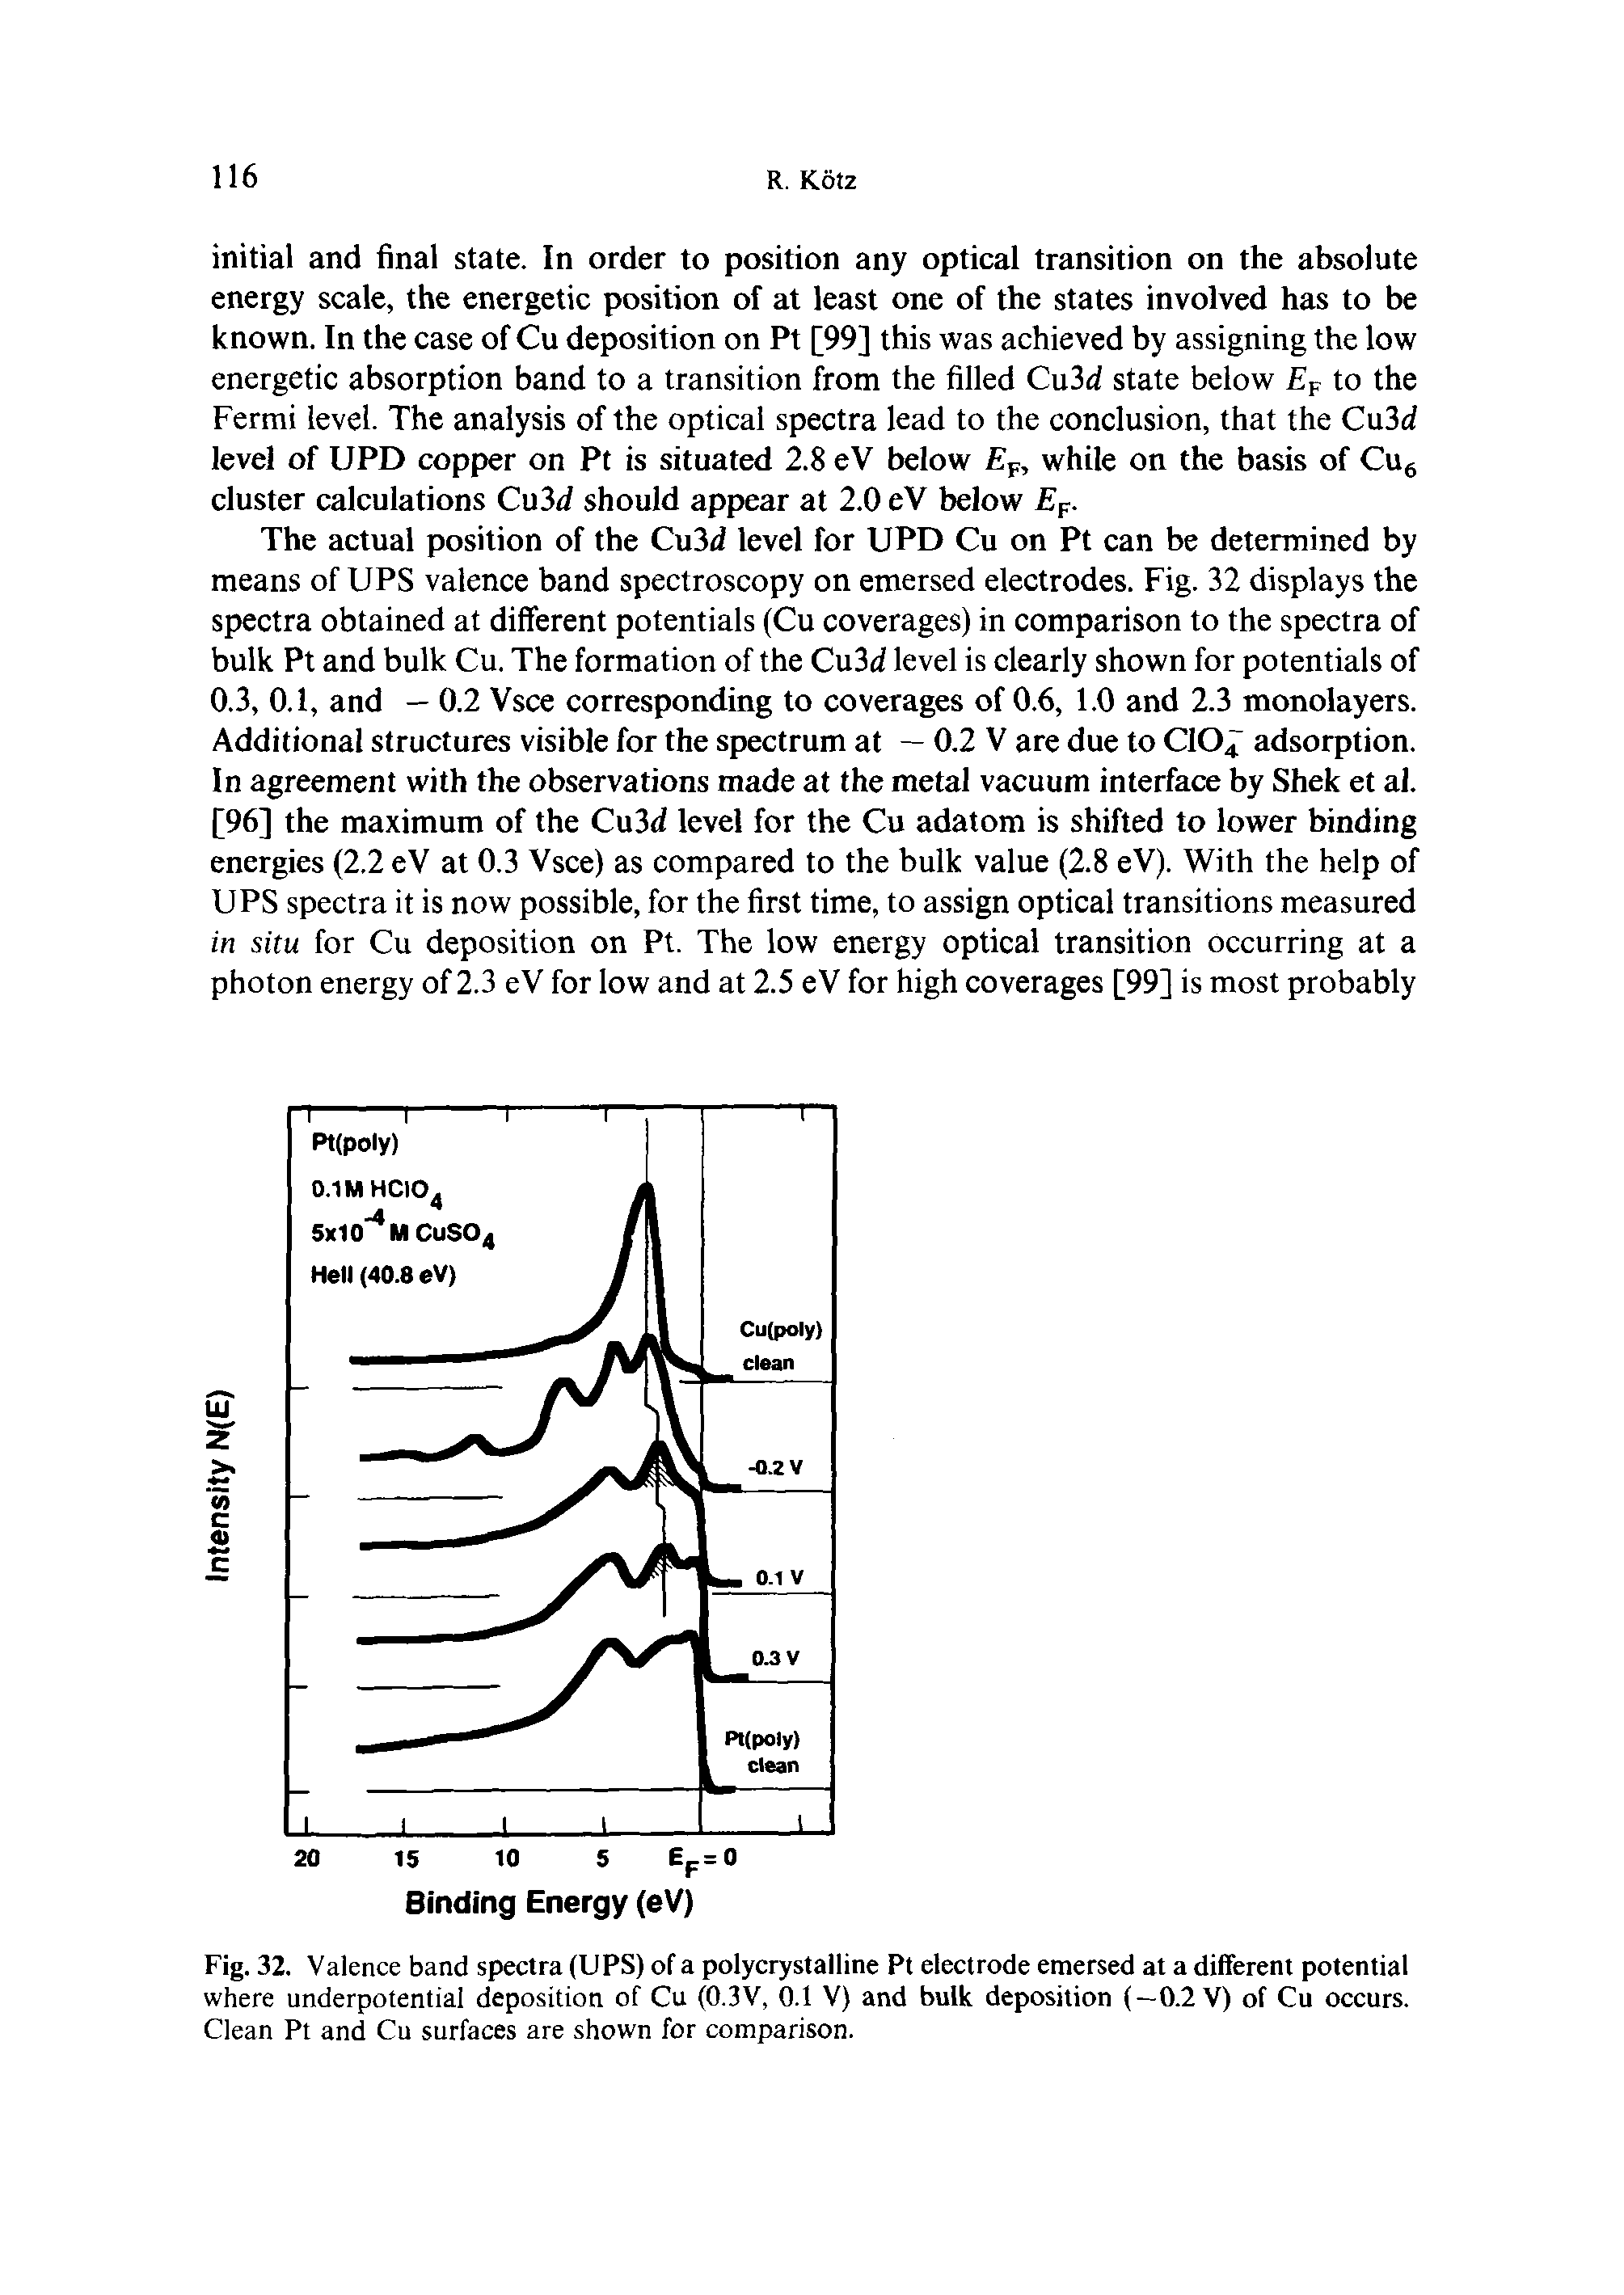 Fig. 32. Valence band spectra (UPS) of a polycrystalline Pt electrode emersed at a different potential where underpotential deposition of Cu (0.3V, 0.1 V) and bulk deposition (—0.2 V) of Cu occurs. Clean Pt and Cu surfaces are shown for comparison.